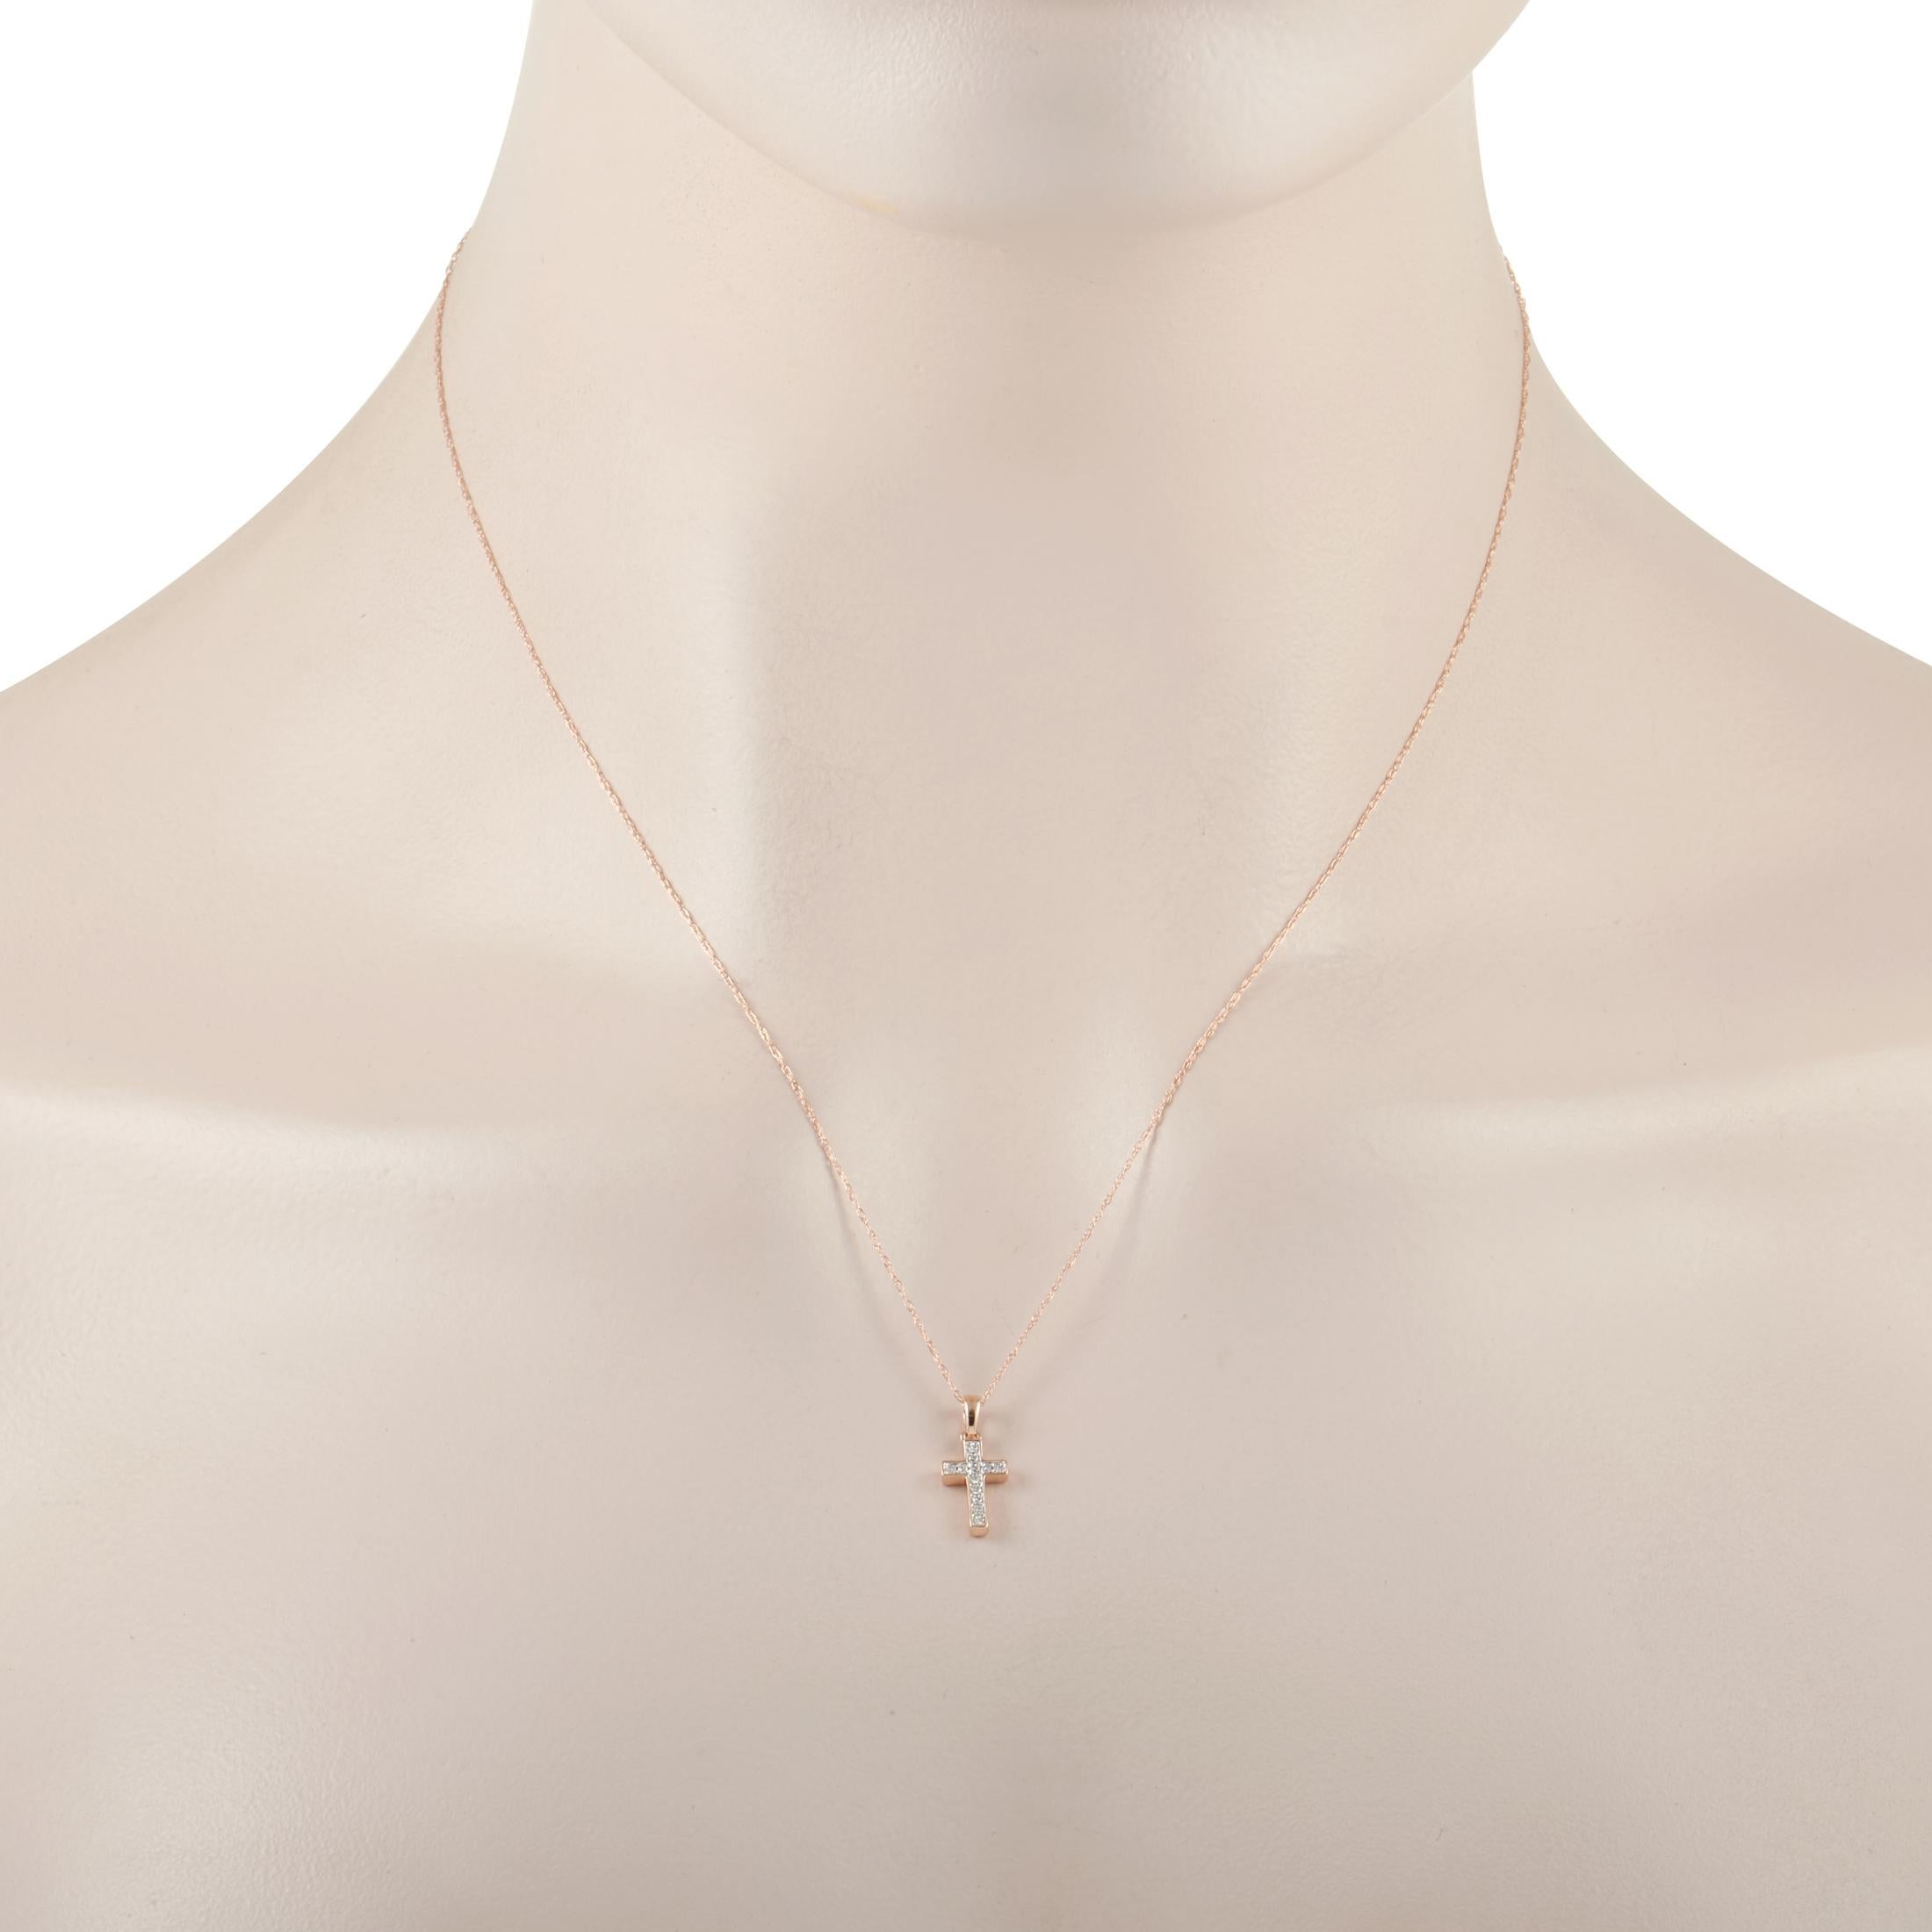 Allow your faith to make a statement with the help of this glittering pendant necklace. Glittering diamonds totaling 0.05 carats contrast beautifully against the 14K Rose Gold setting on the cross-shaped pendant, which measures .57” long and .25”